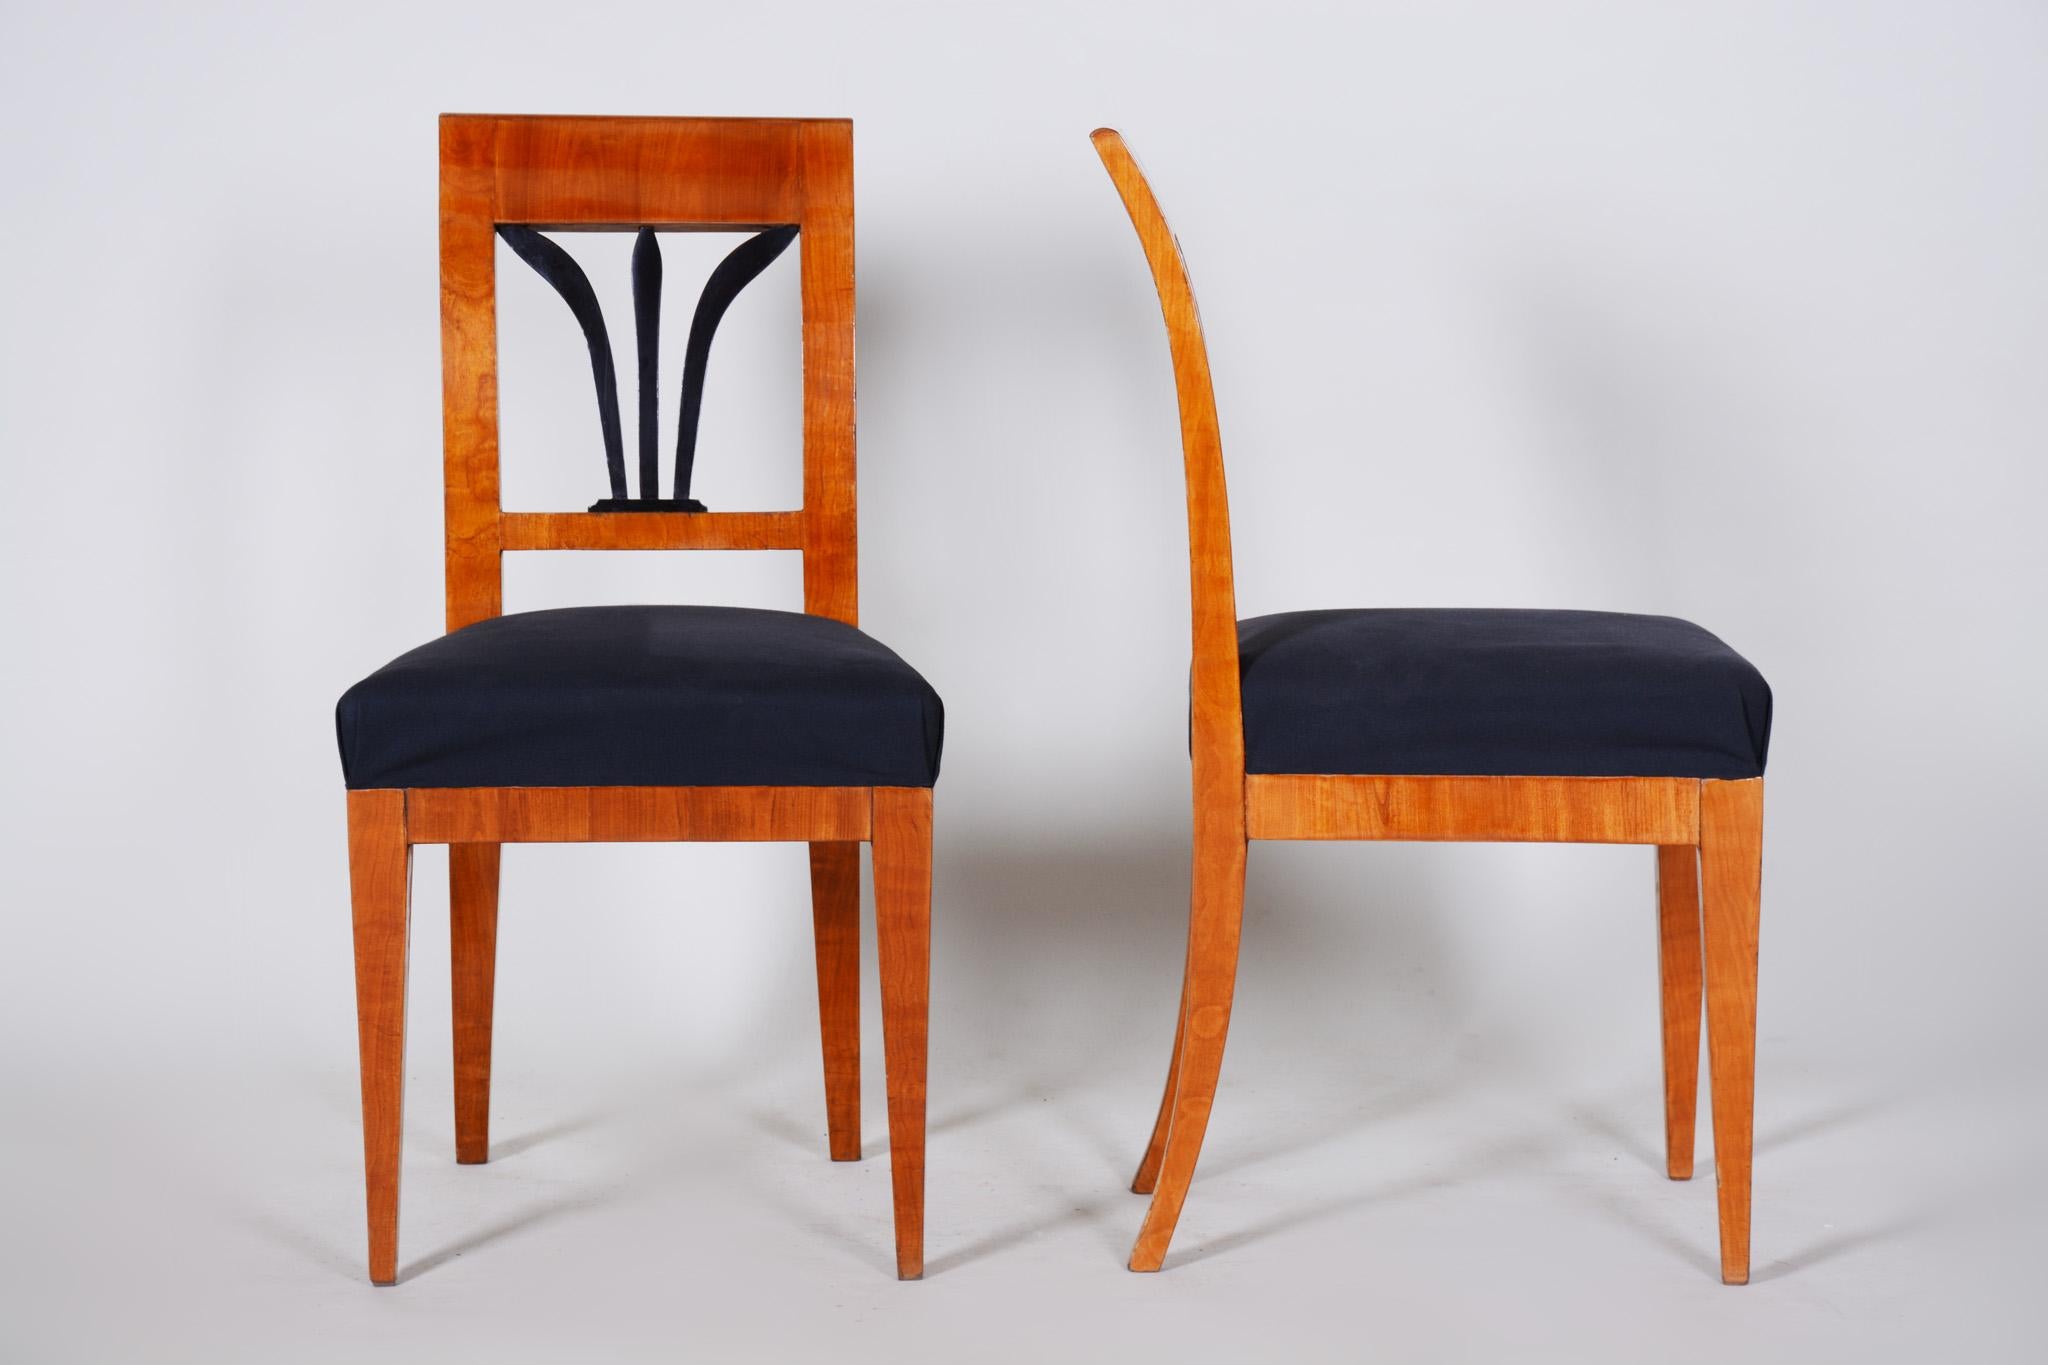 Pair of Biedermeier Dining Chairs Made in Czechia circa 1830s, Restored Cherry In Good Condition For Sale In Horomerice, CZ